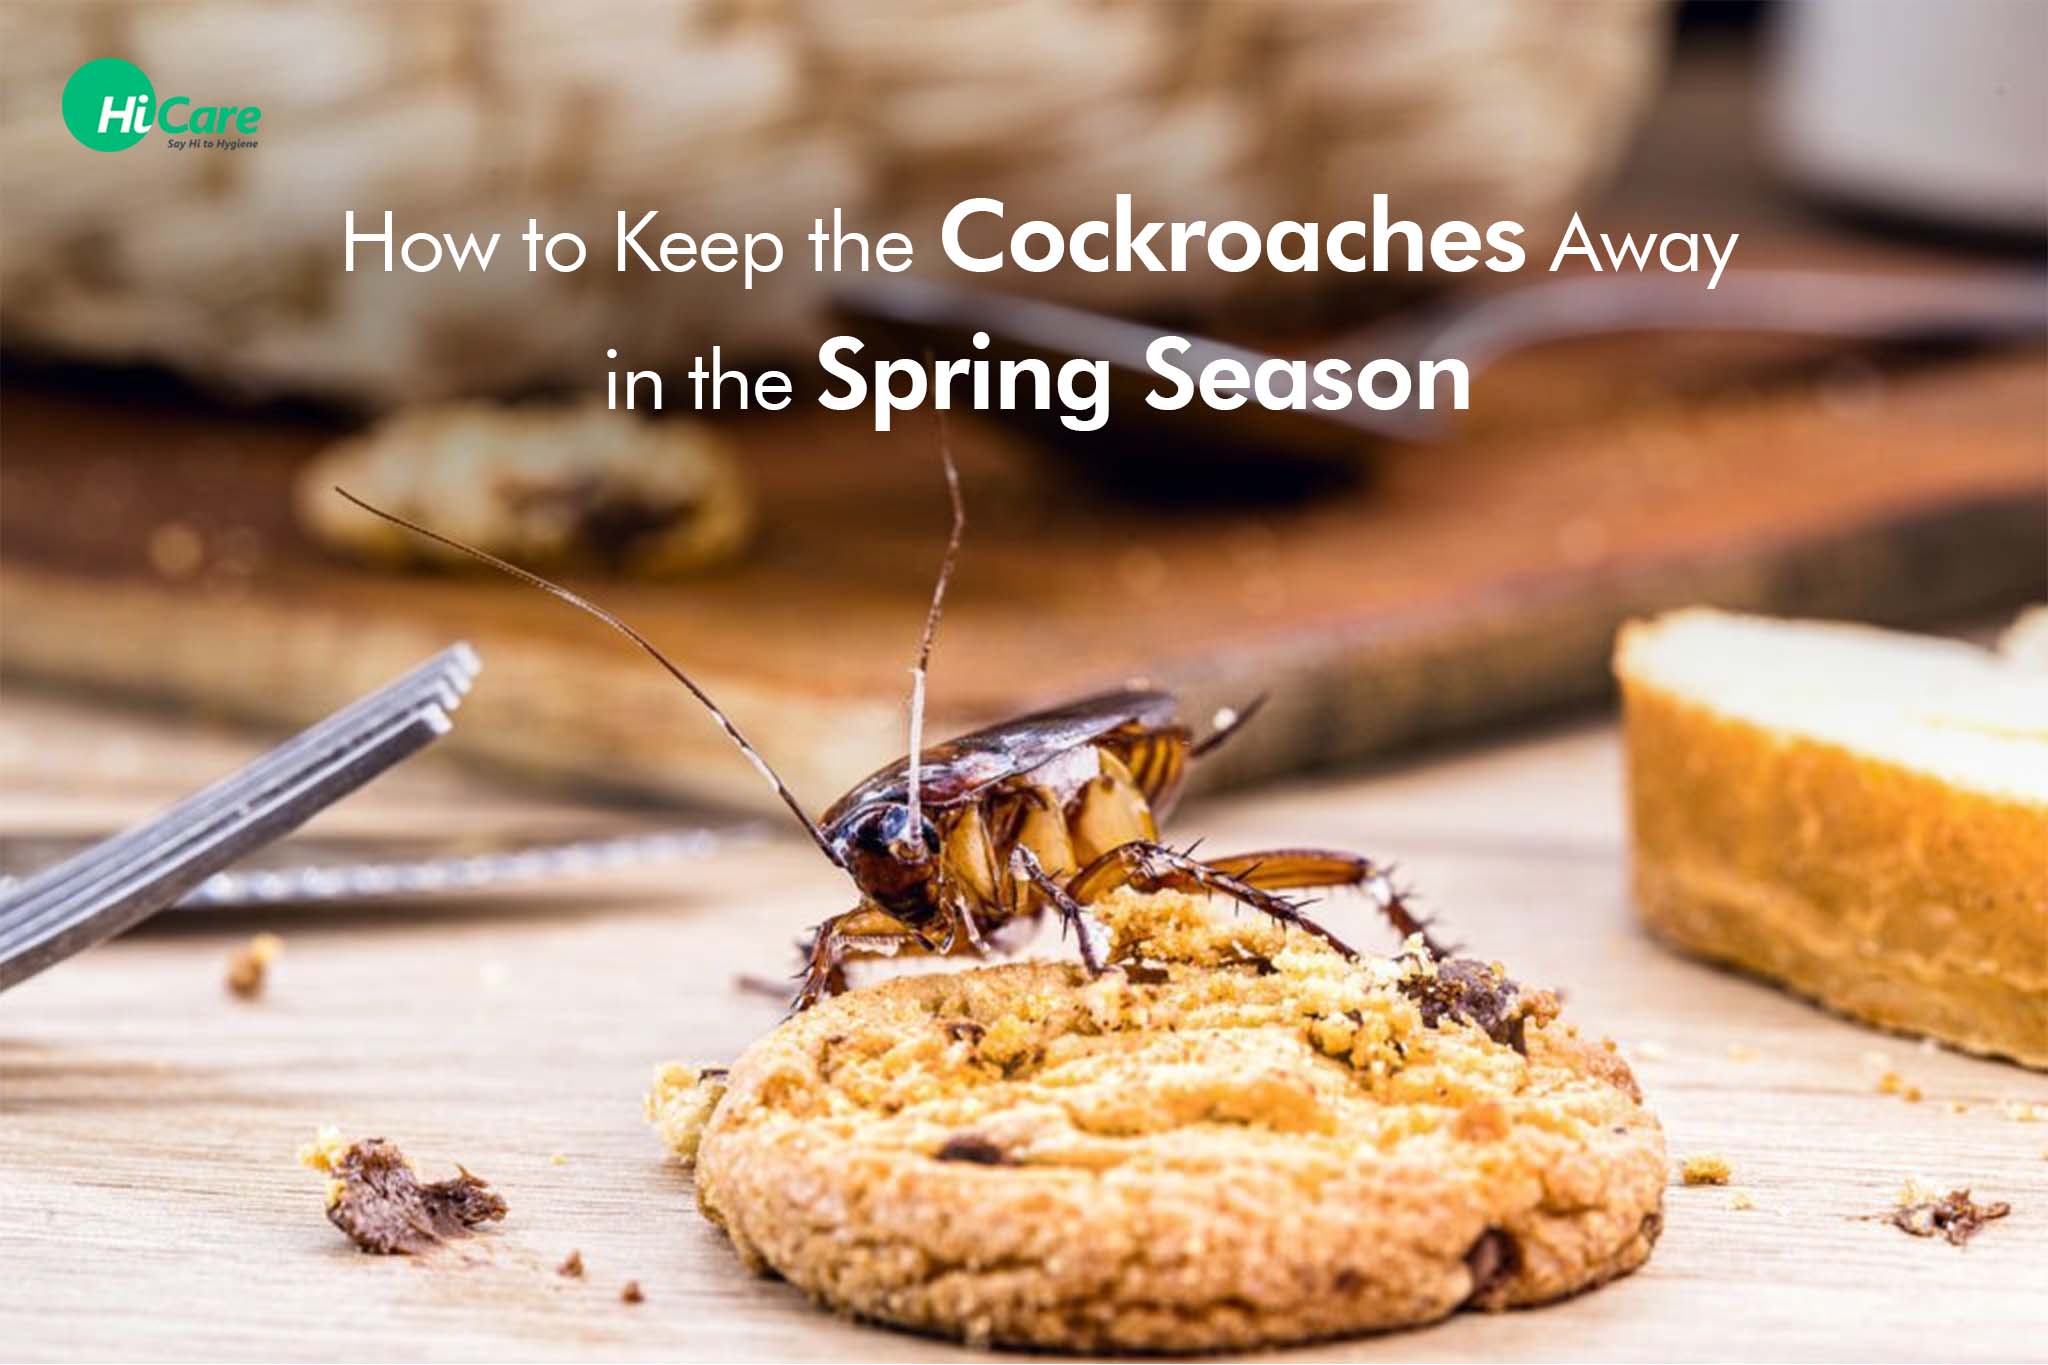 How to Keep the Cockroaches Away in the Spring Season